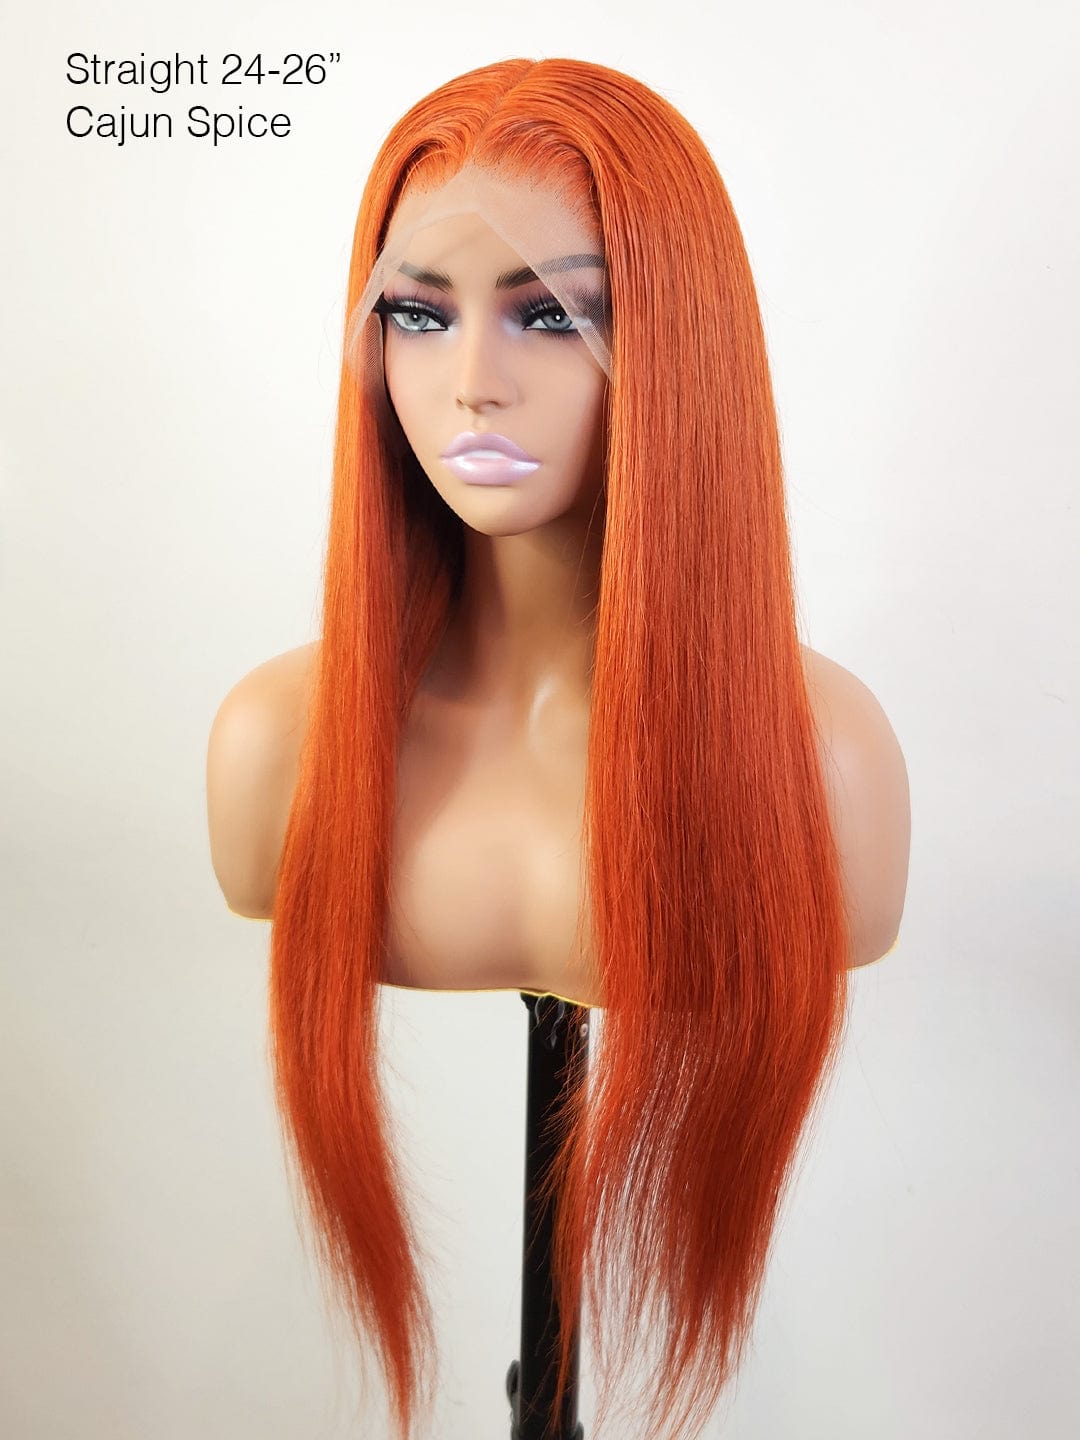 Brooklyn Hair 13x4 HD Lace Front Color-Pop Wig / Straight 24-26" 24-26" / Cajun Spice / 13x4 HD Lace